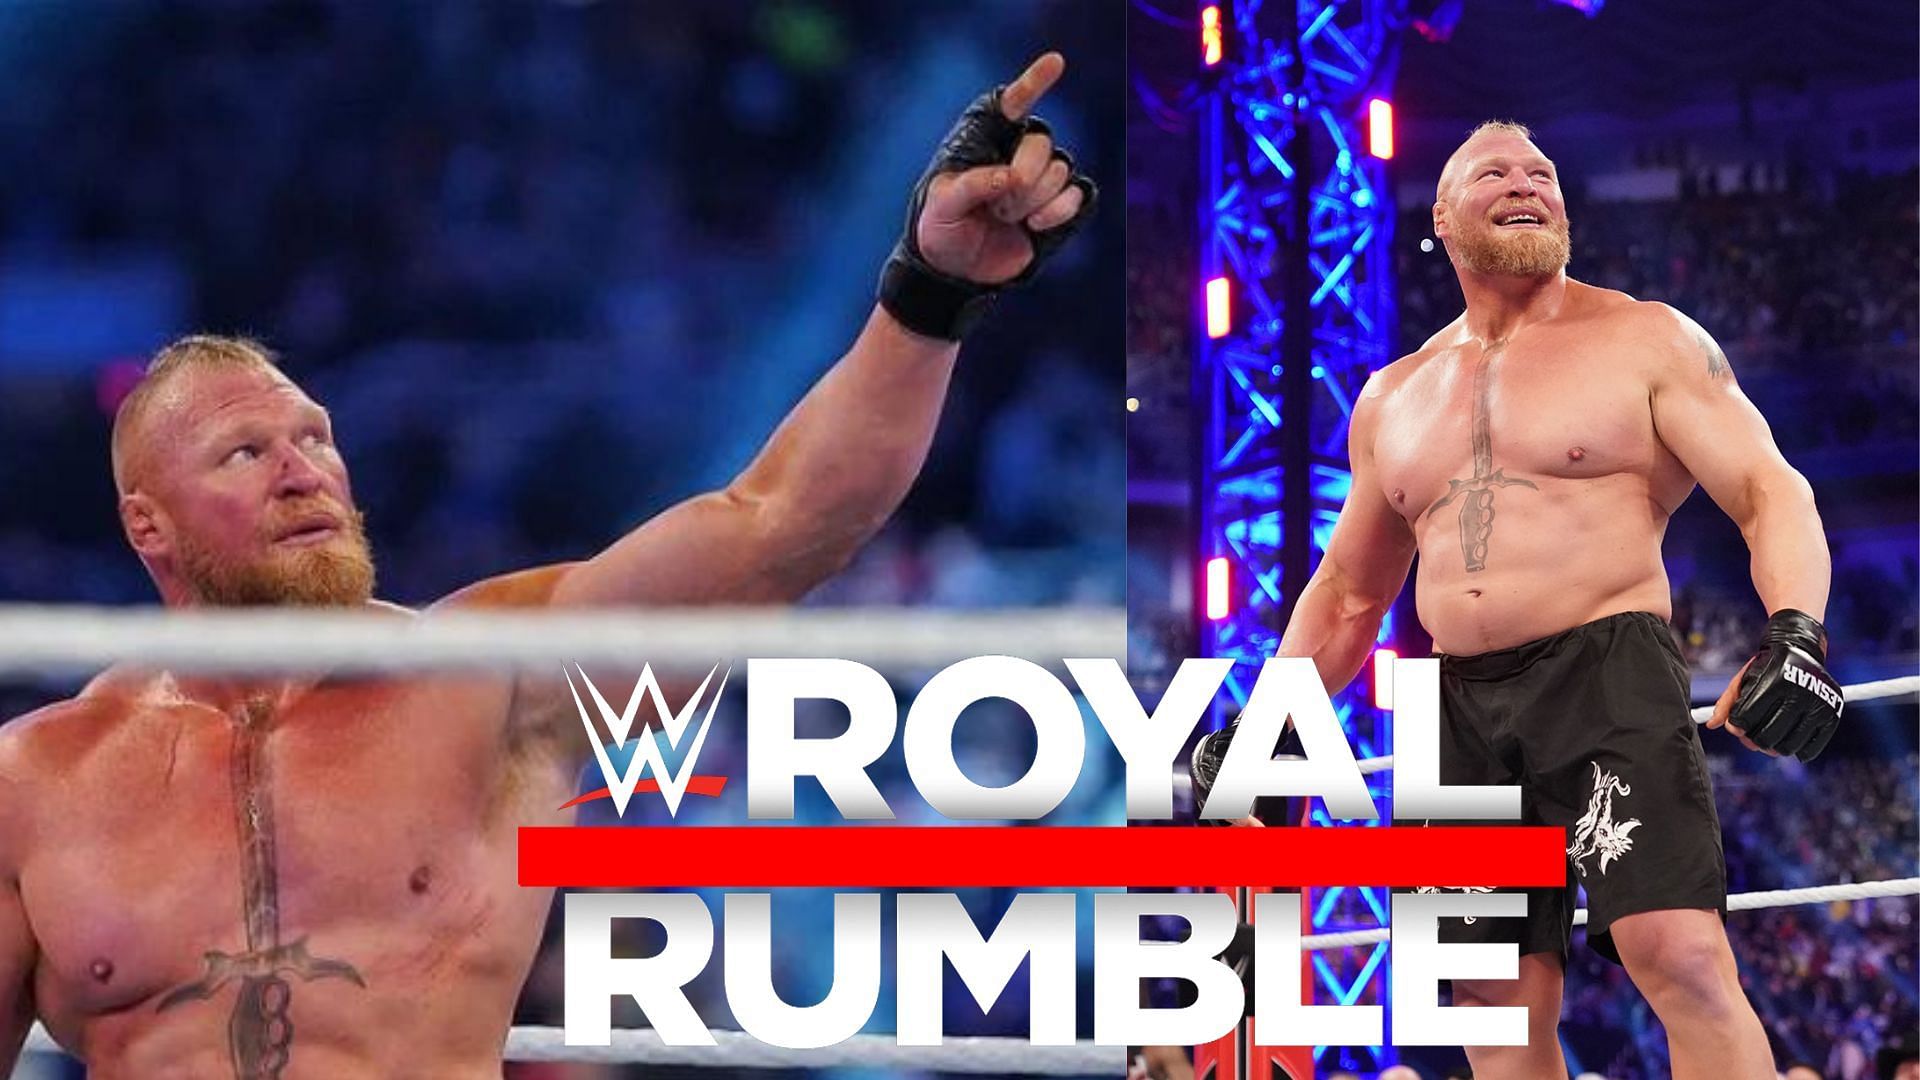 WWE Royal Rumble 2023 match card is already set for an exciting event